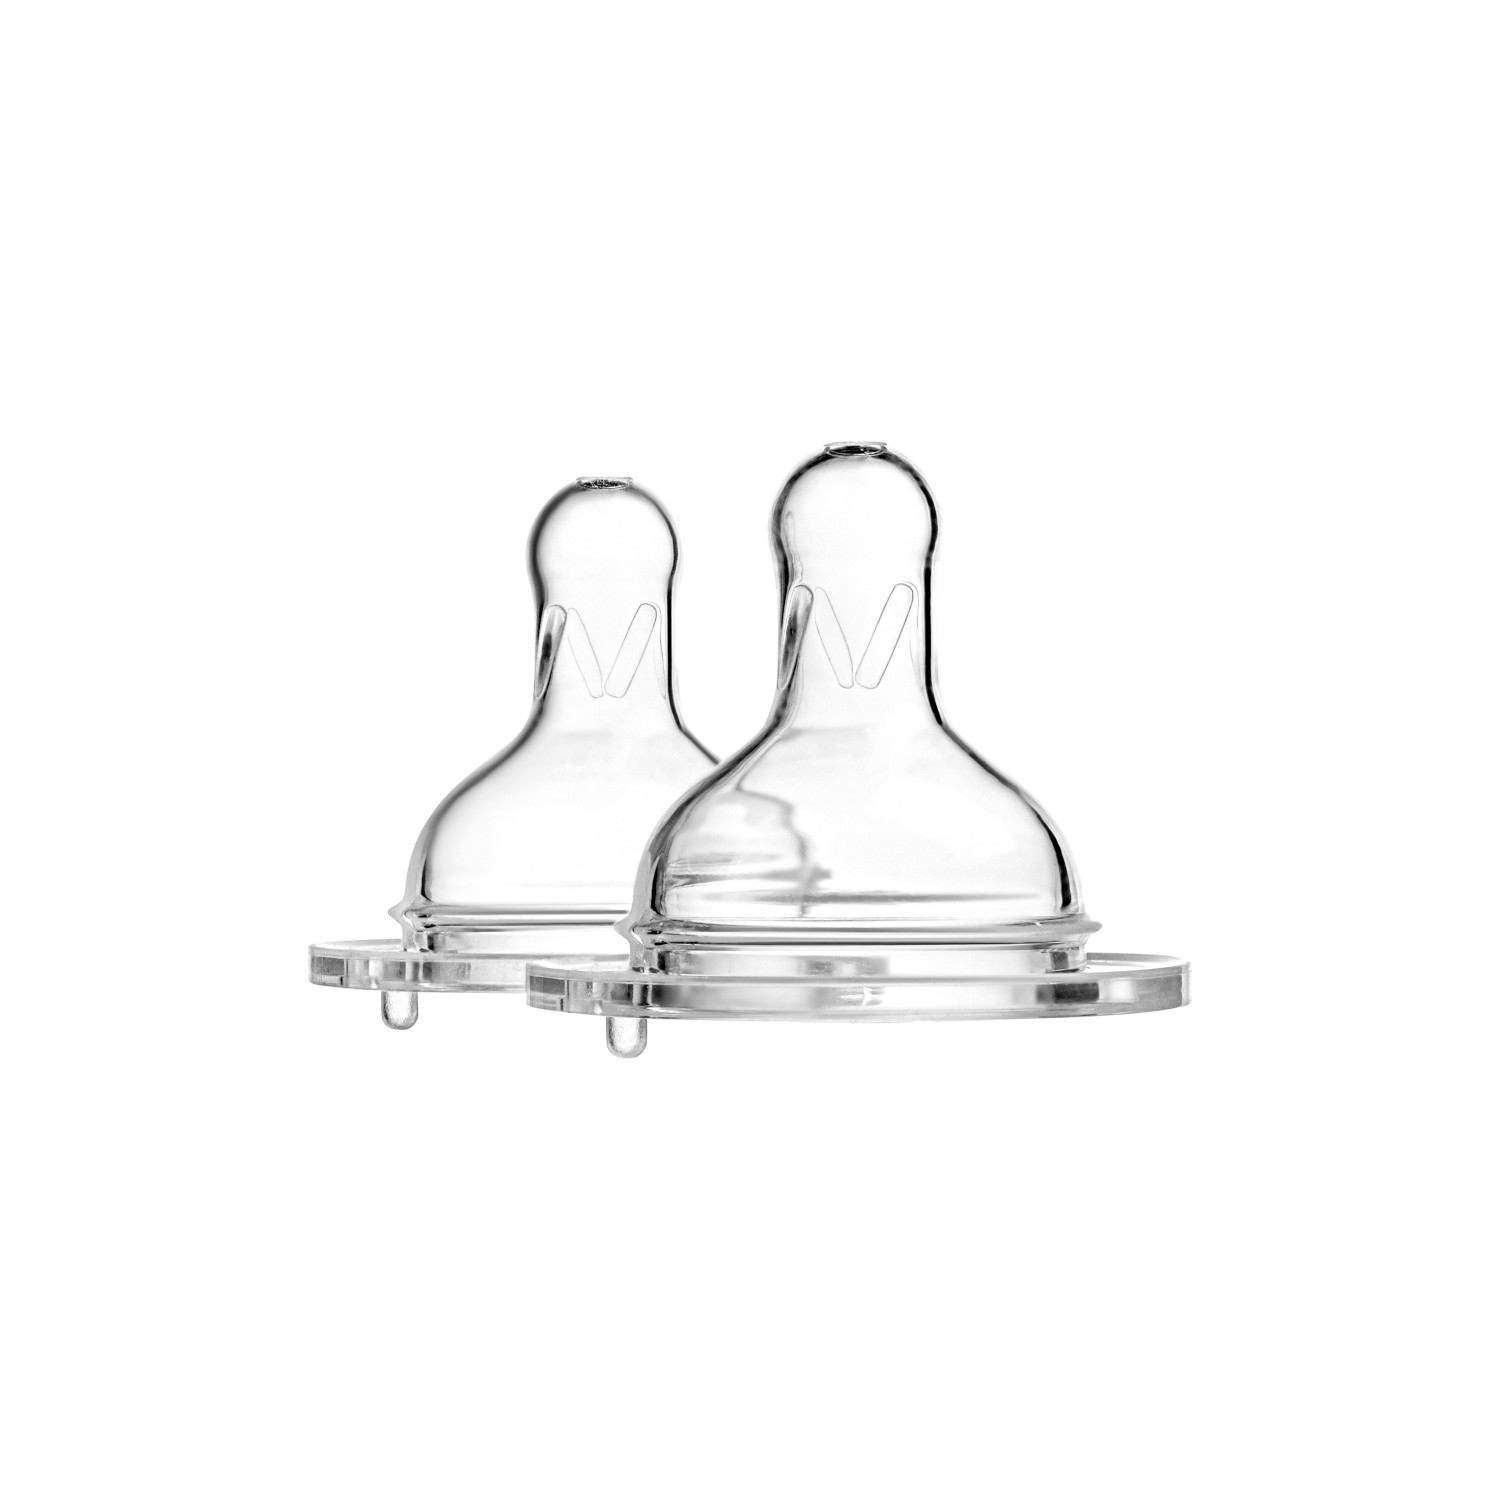 Anti-colic teat A0121  for wide neck bottle A0107